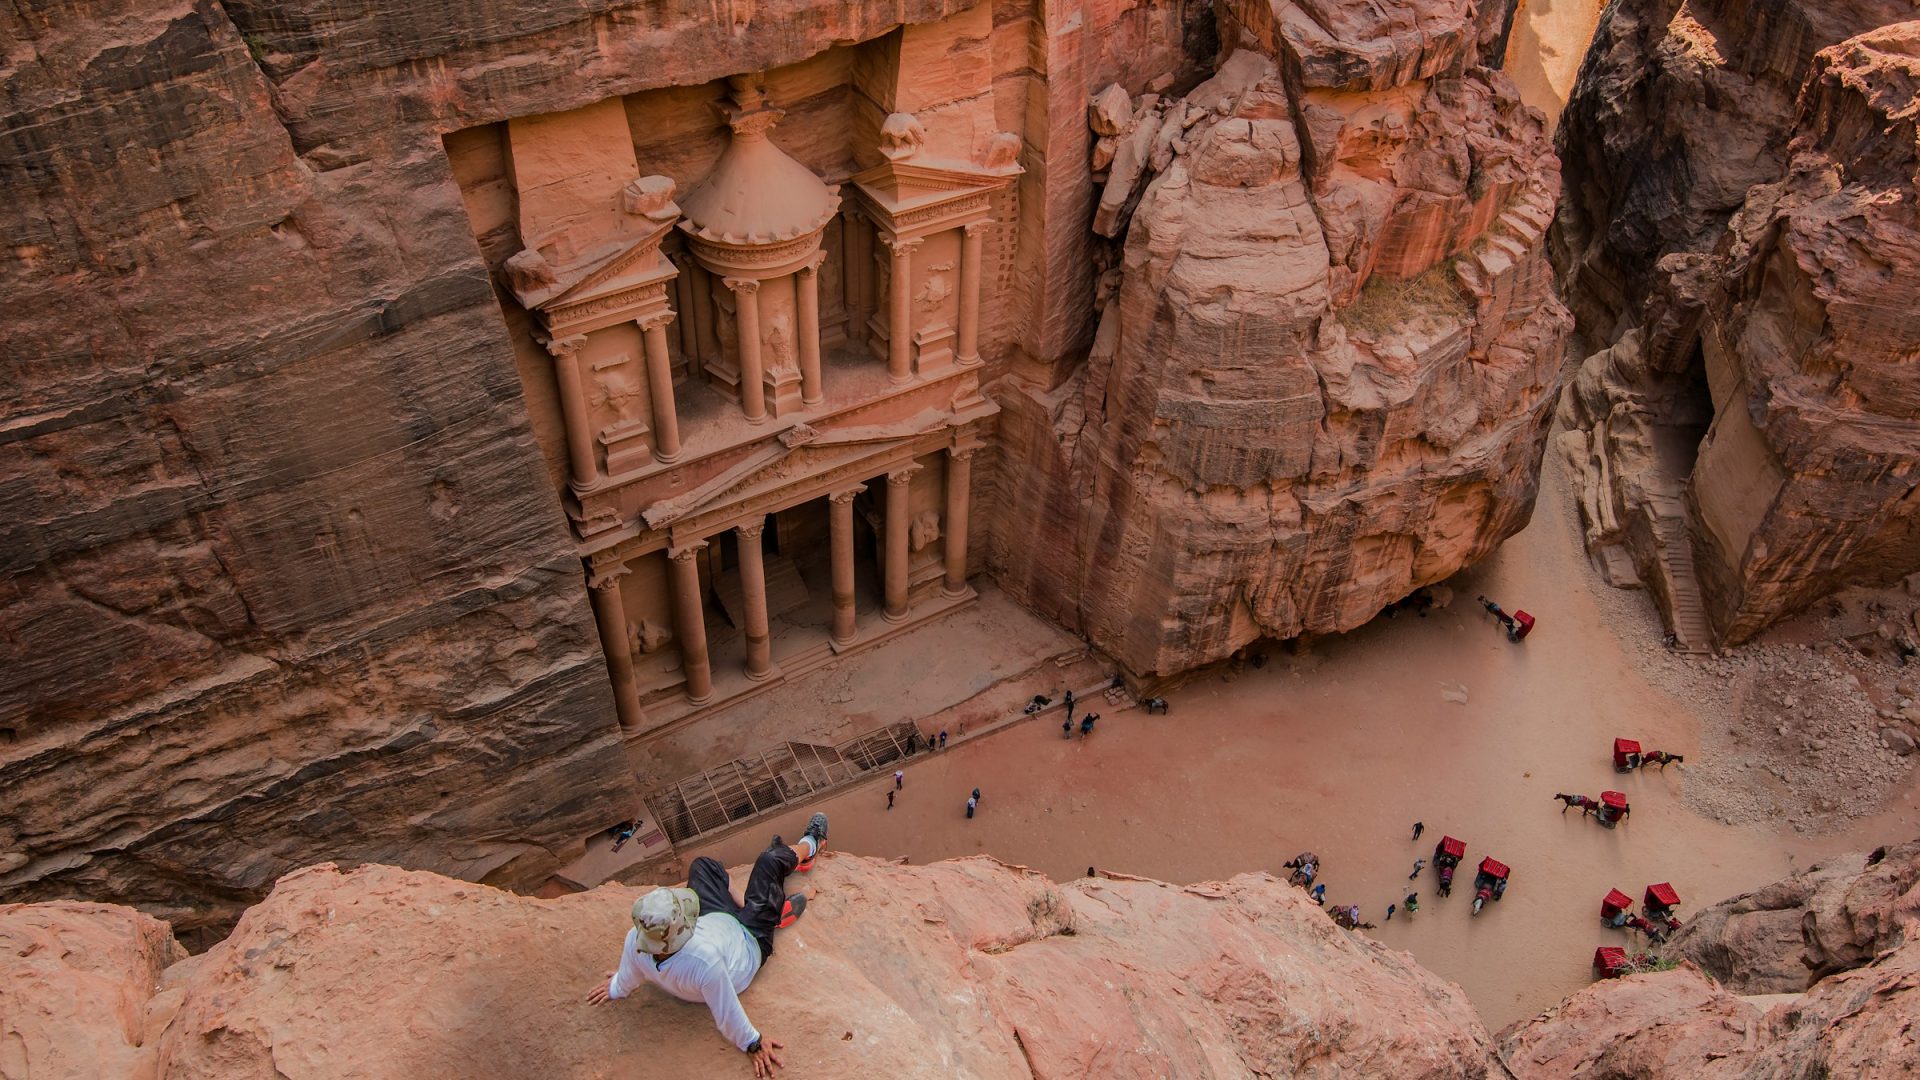 Looking down on one of Petra's archaeological sites from a rock